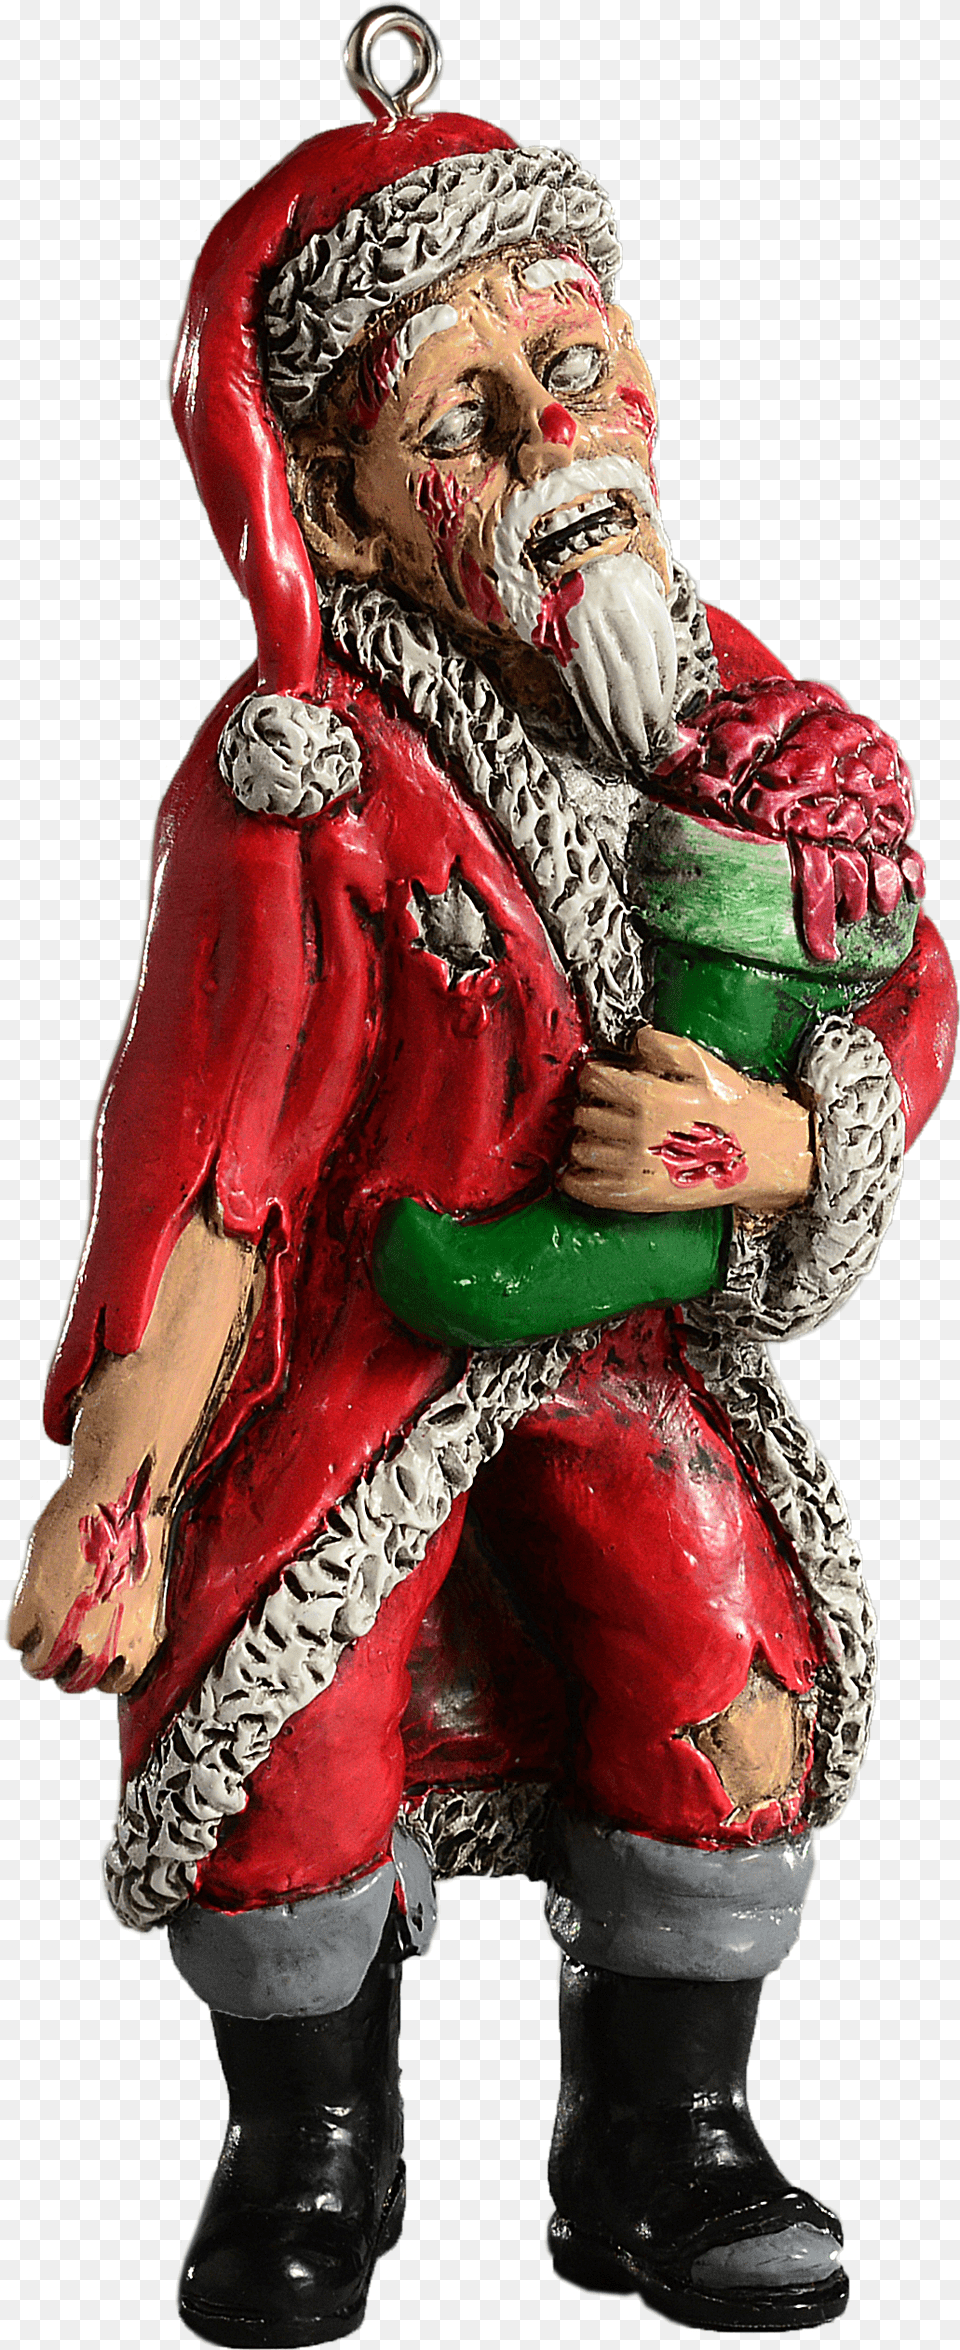 Zombie Santa Christmas Scary Christmas Tree Ornaments, Figurine, Adult, Person, Woman Png Image